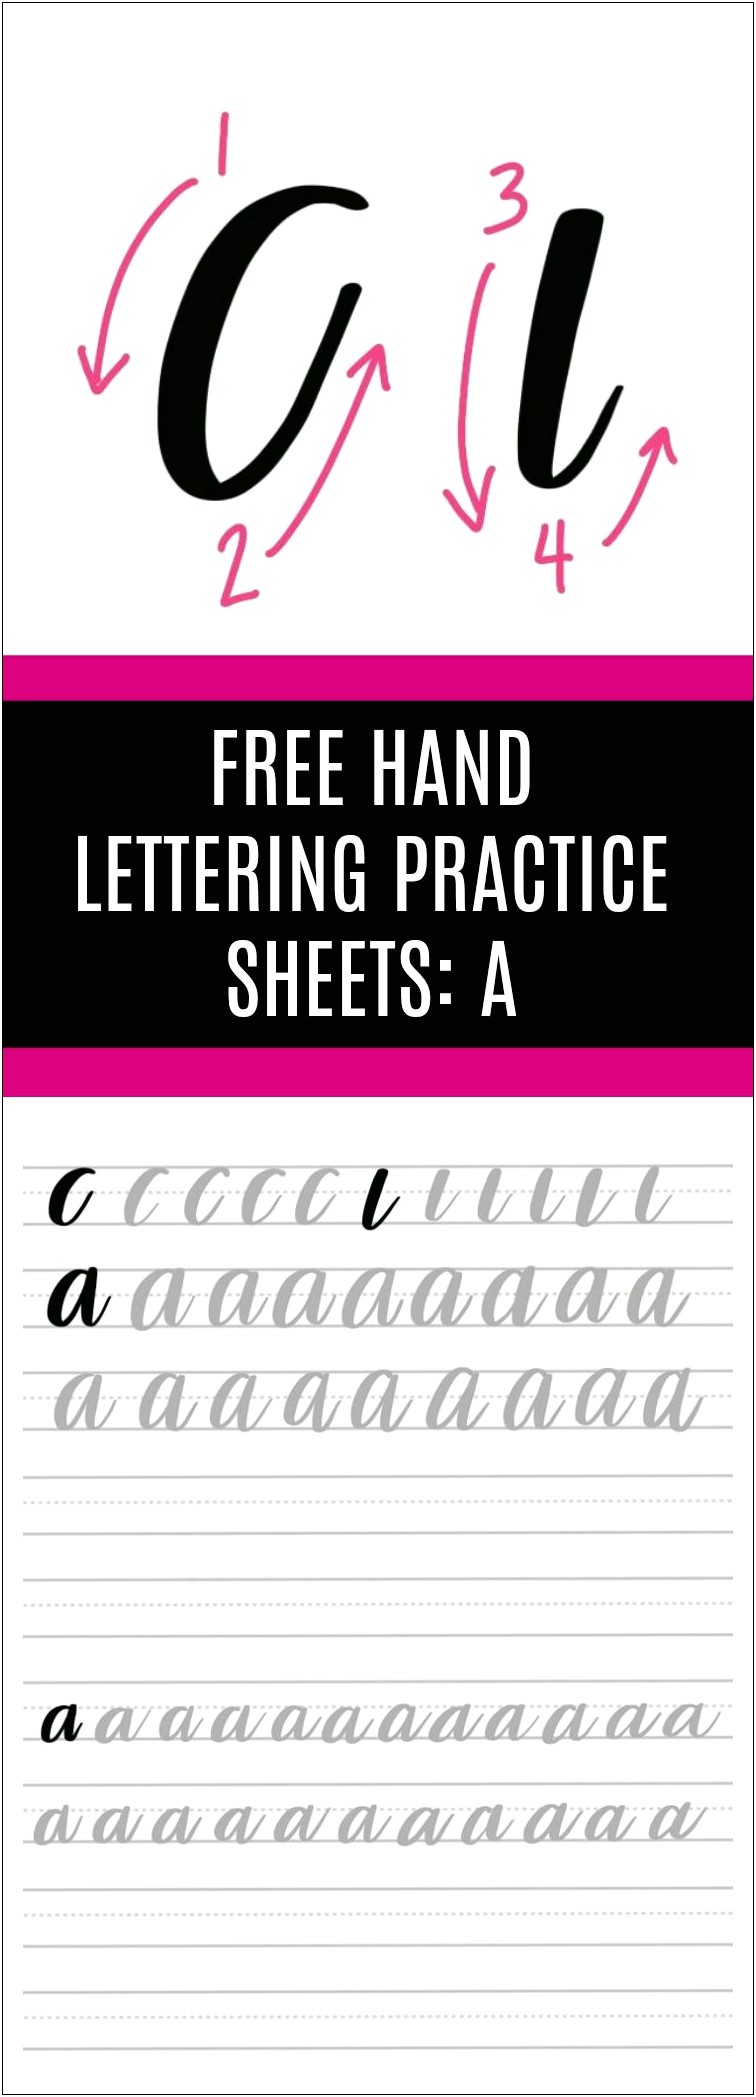 Hand Lettering Tutorial For Beginners Letterform Template Free